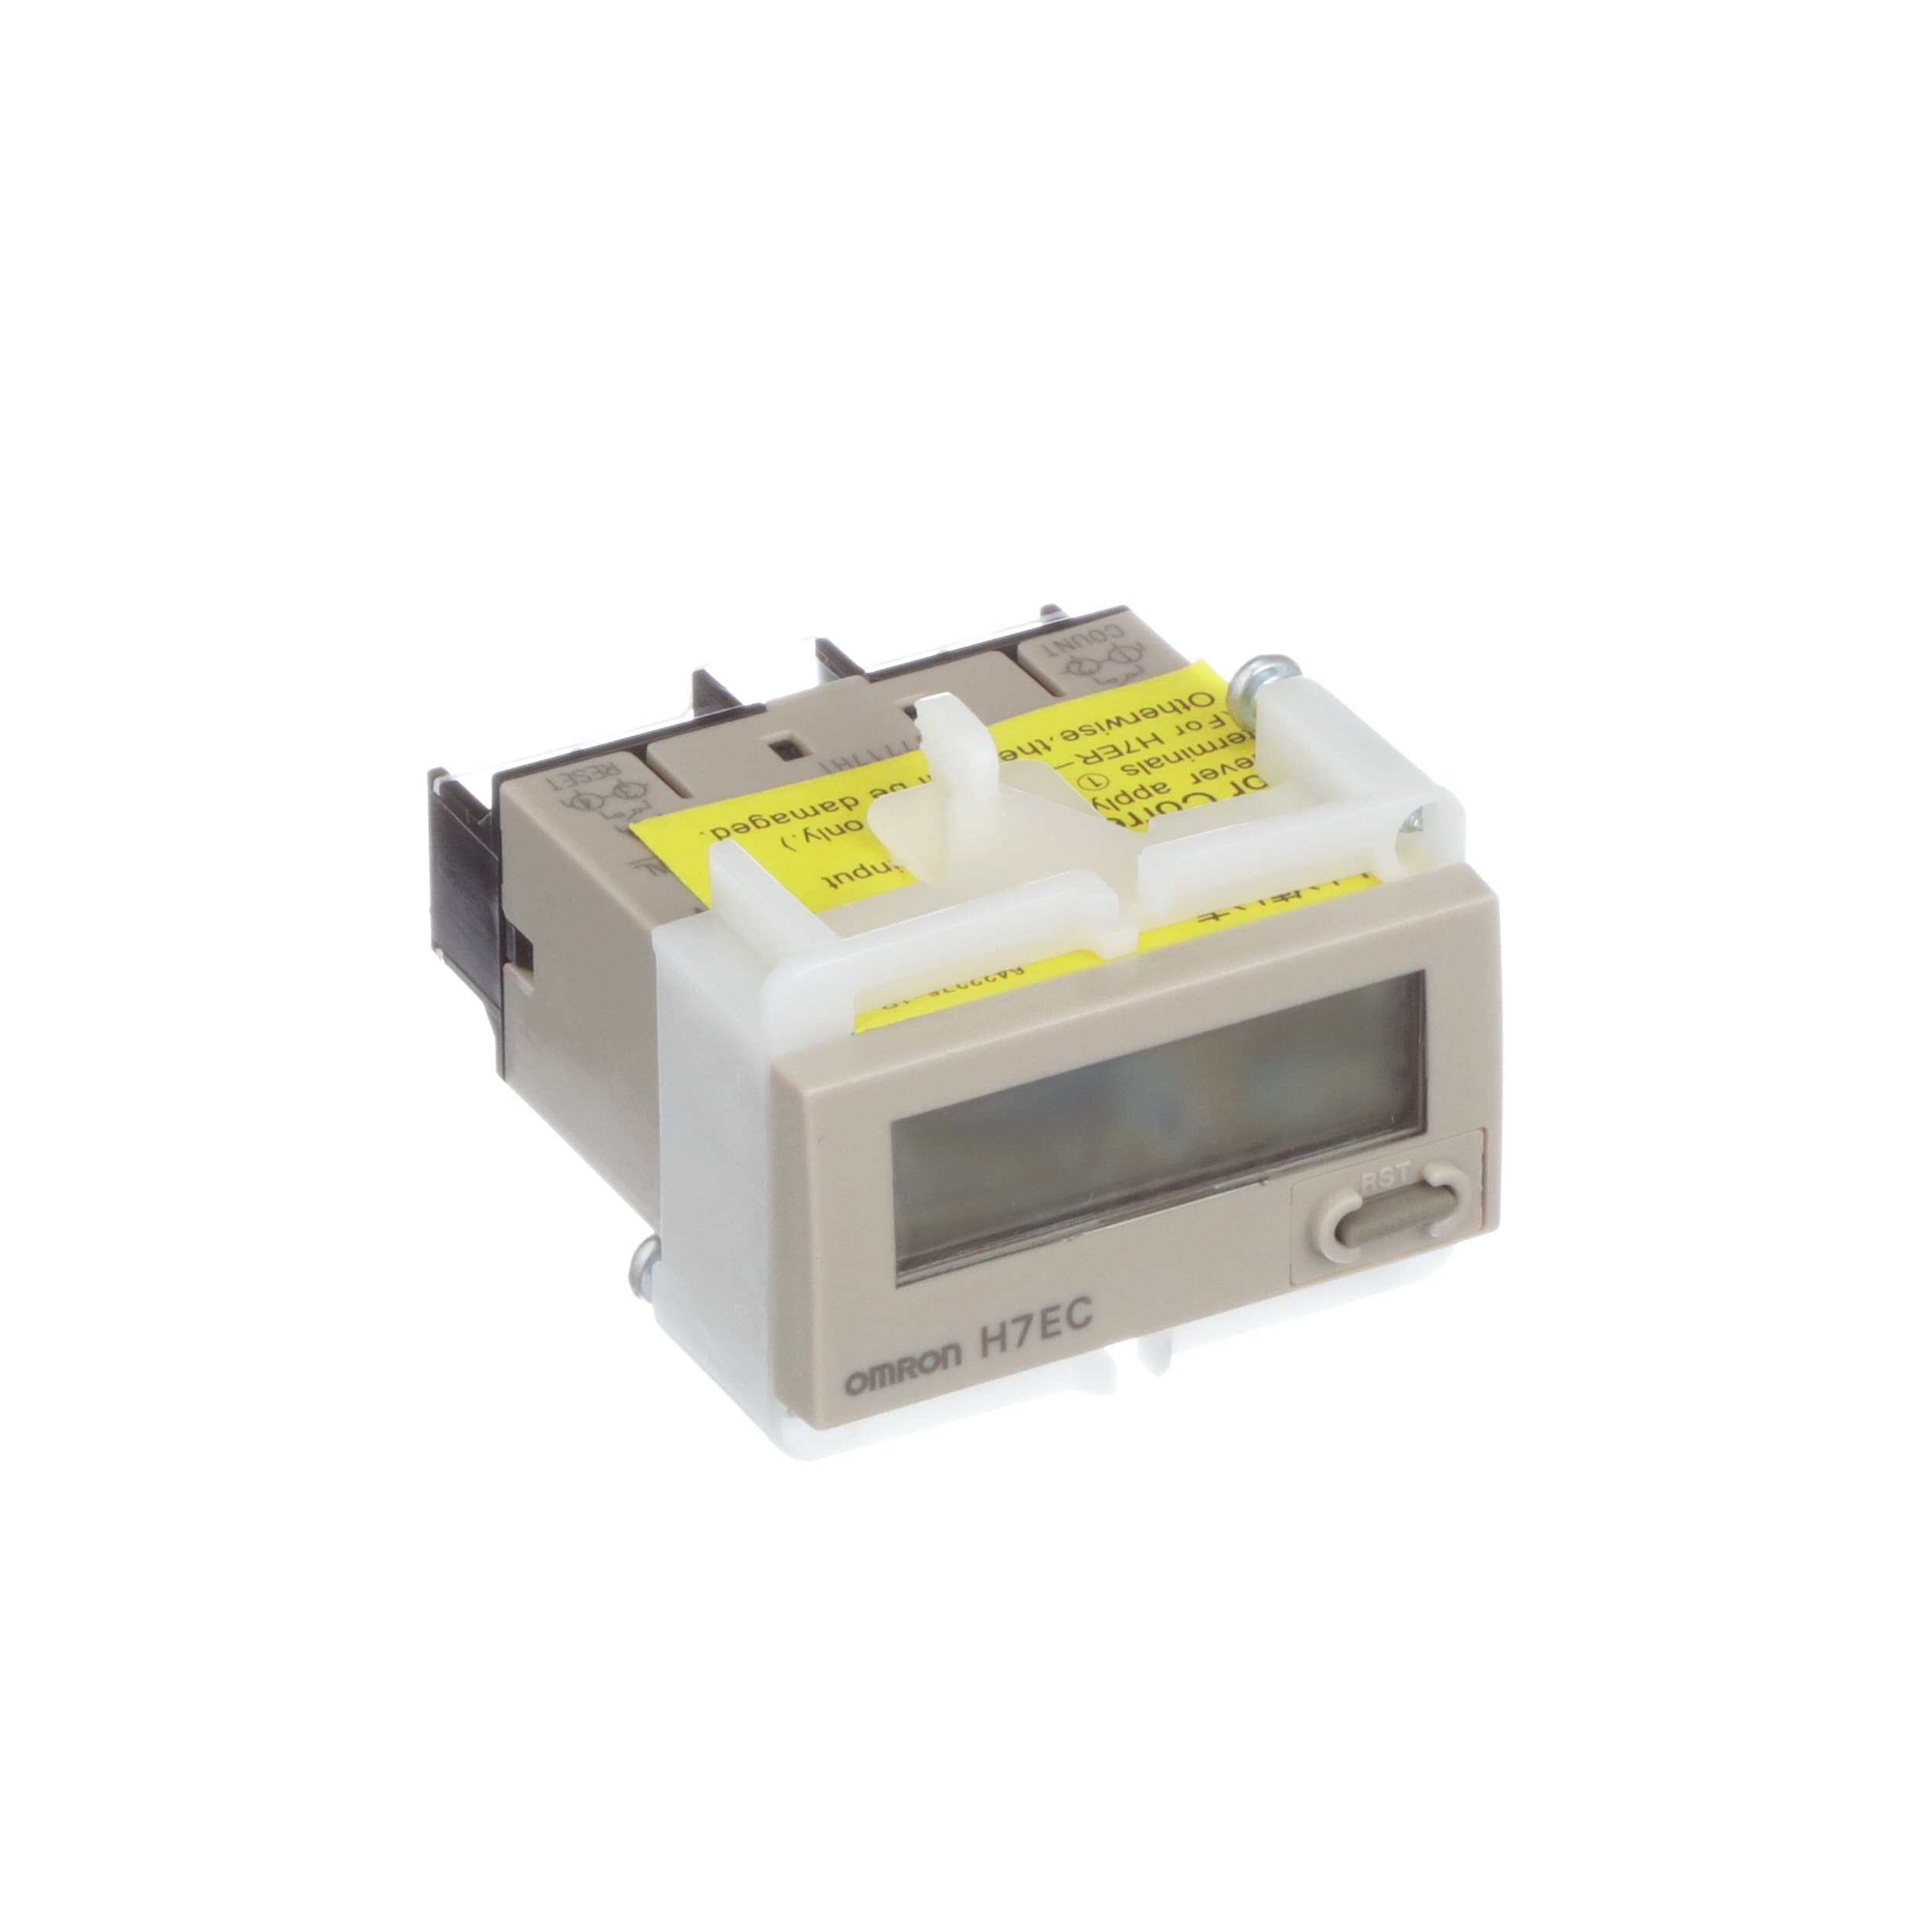 OMRON AUTOMATION H7EC-BLM H7ECBLM COUNTER TOTALIZER 6DIGIT 30CPS SCREW TERMINAL 